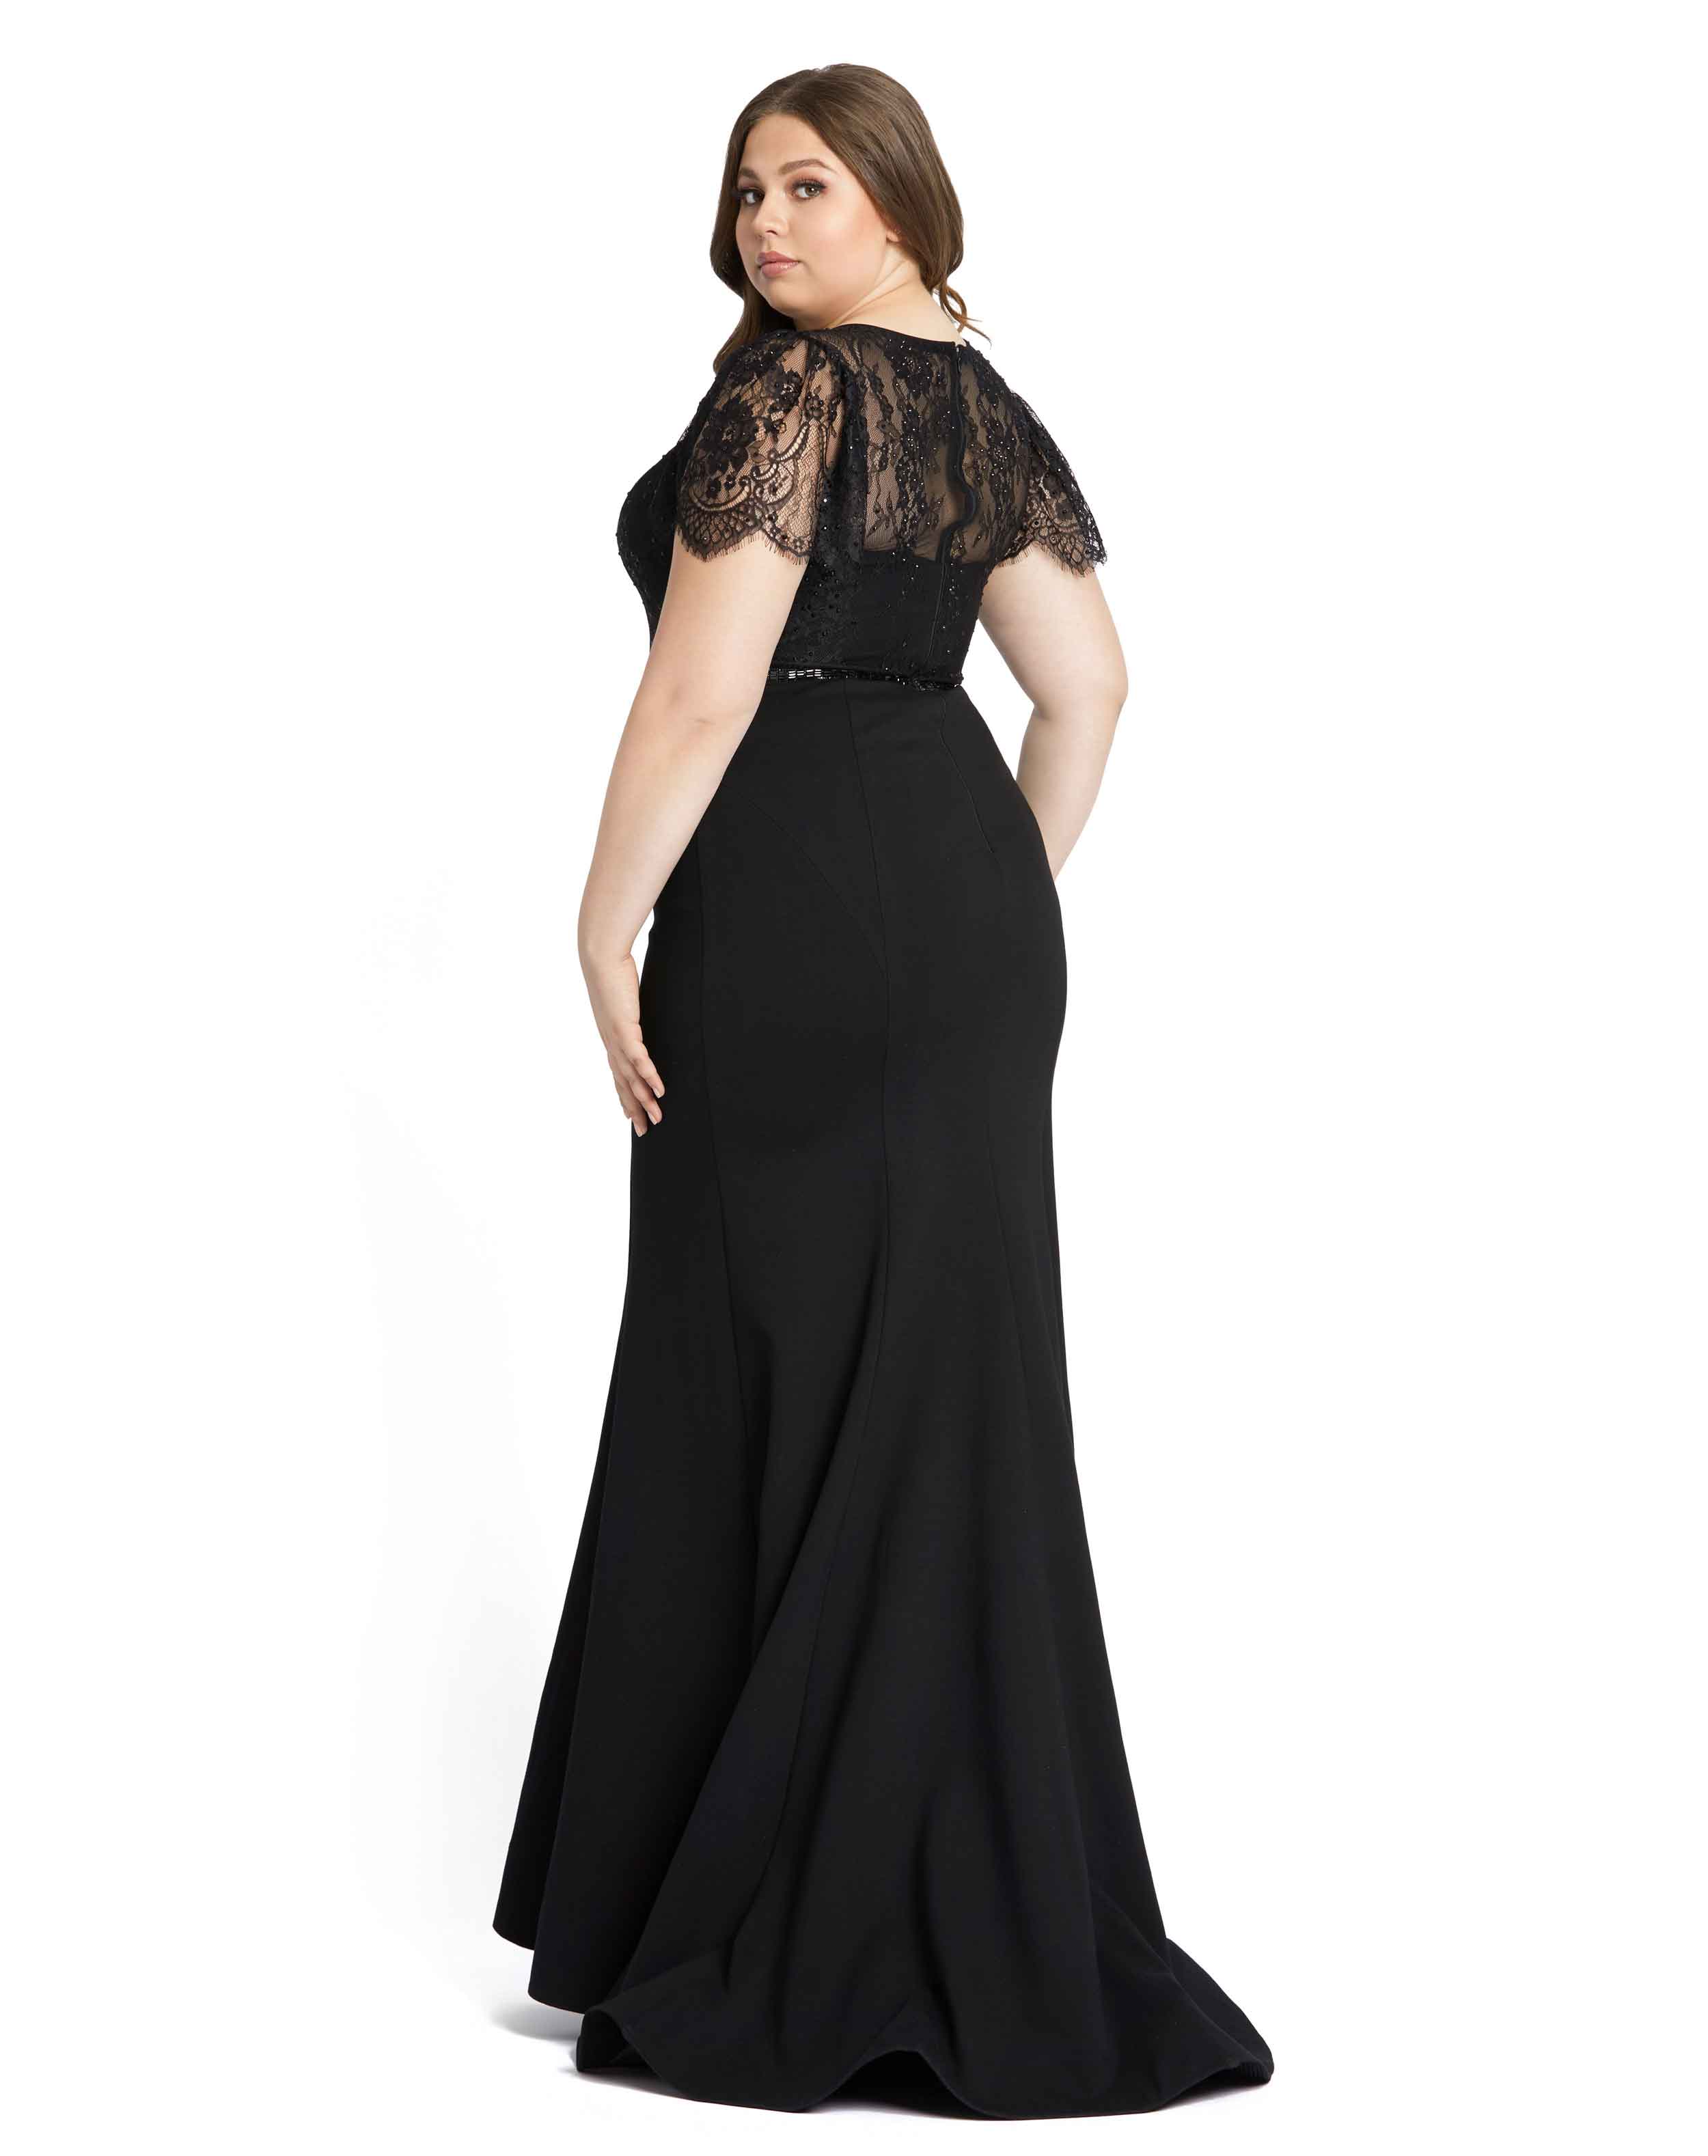 Lace Illusion High Neck Cap Sleeve Gown